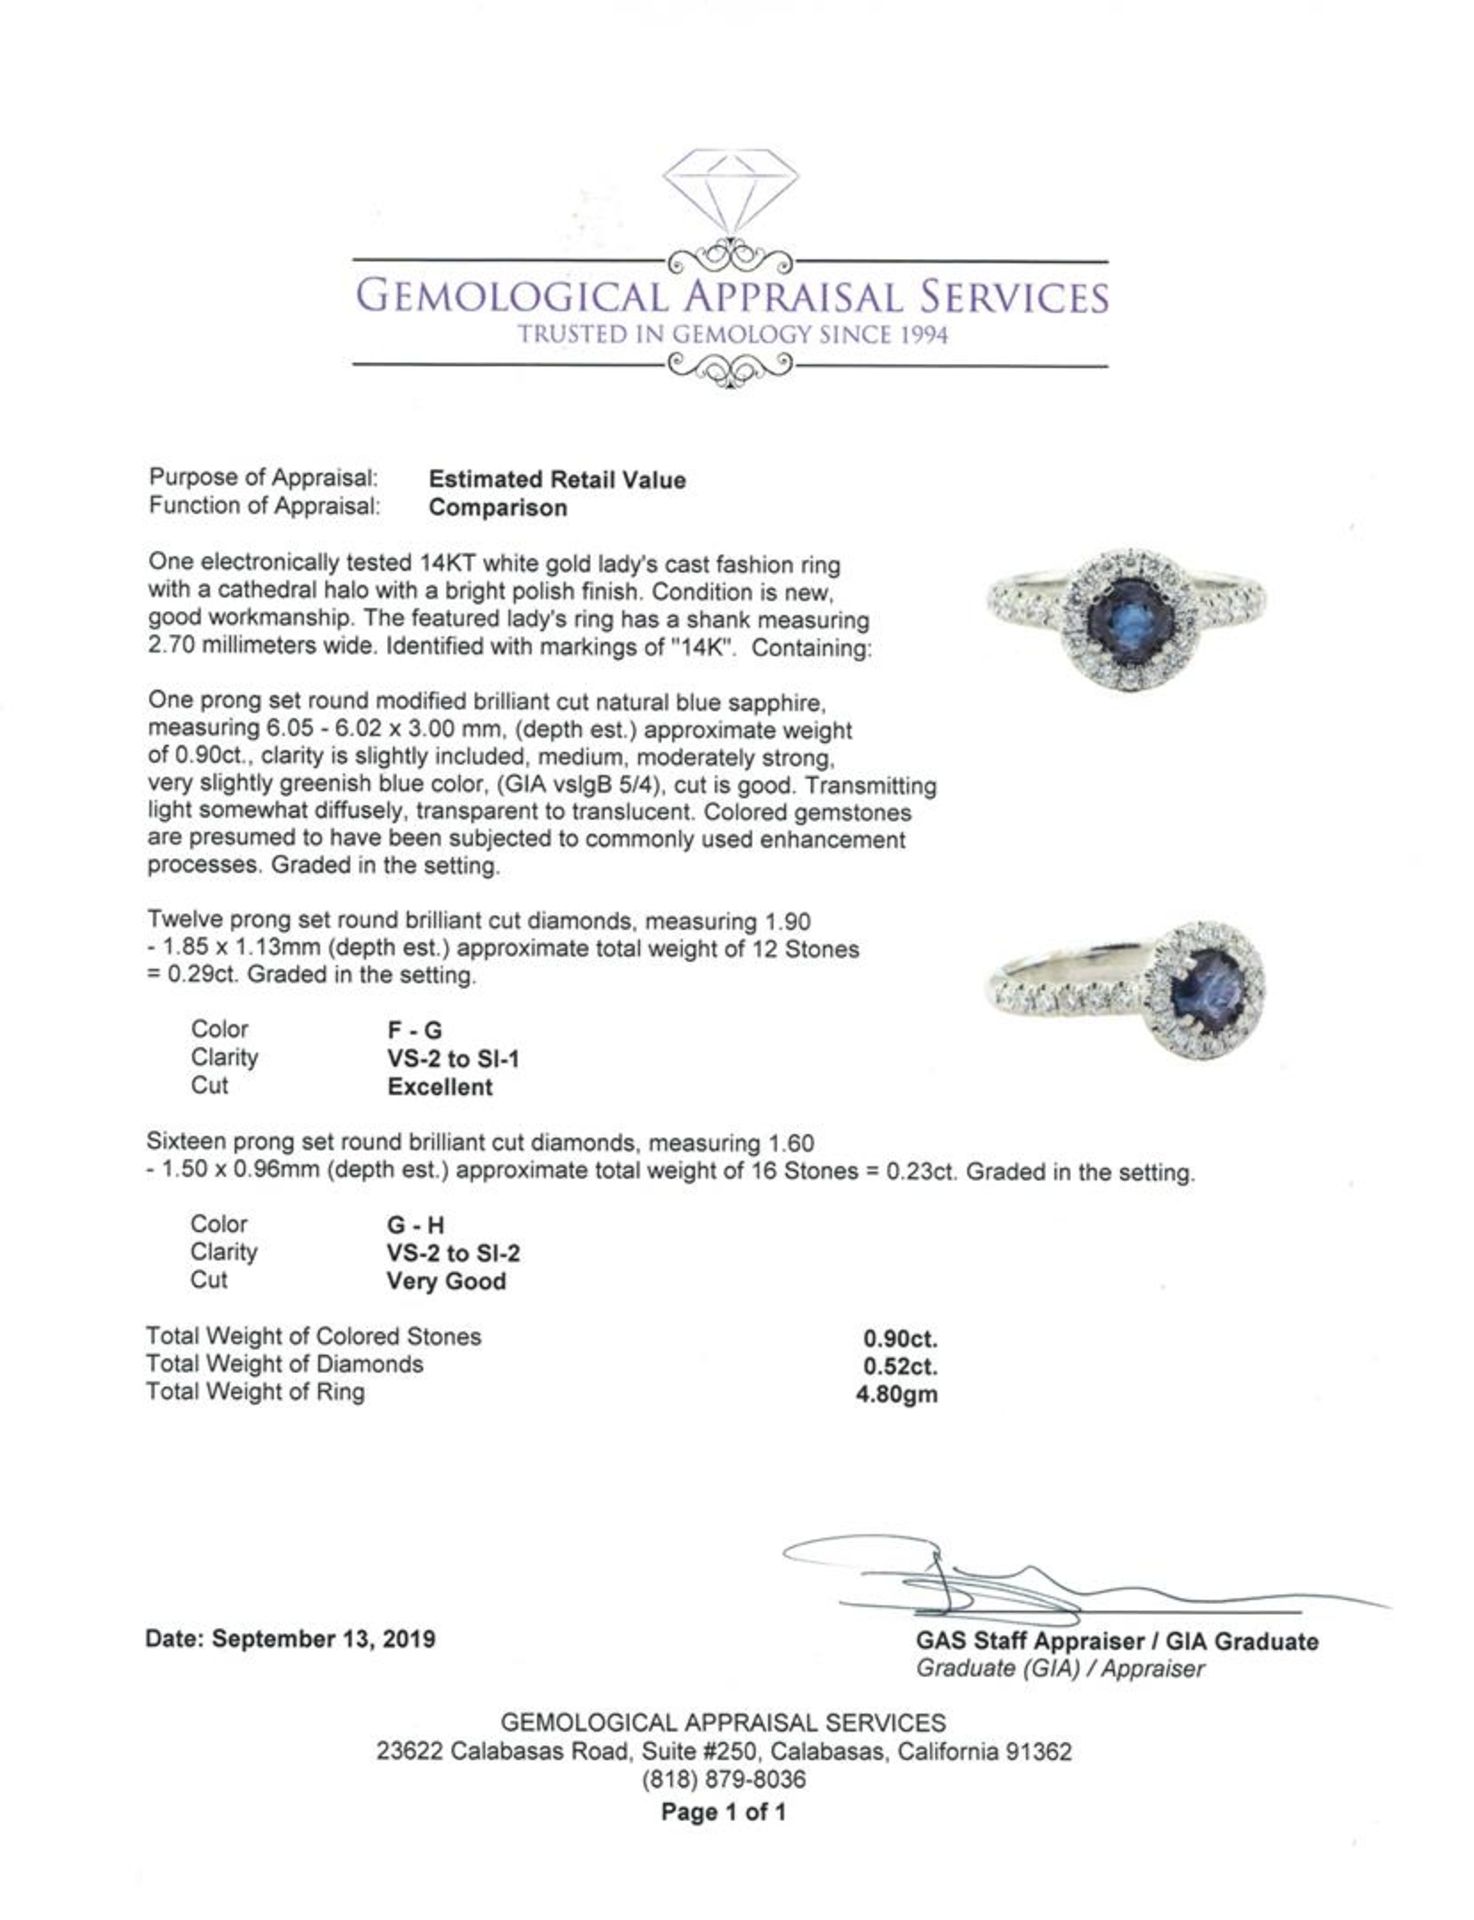 1.42 ctw Sapphire And Diamond Ring - 14KT White Gold - Image 5 of 5